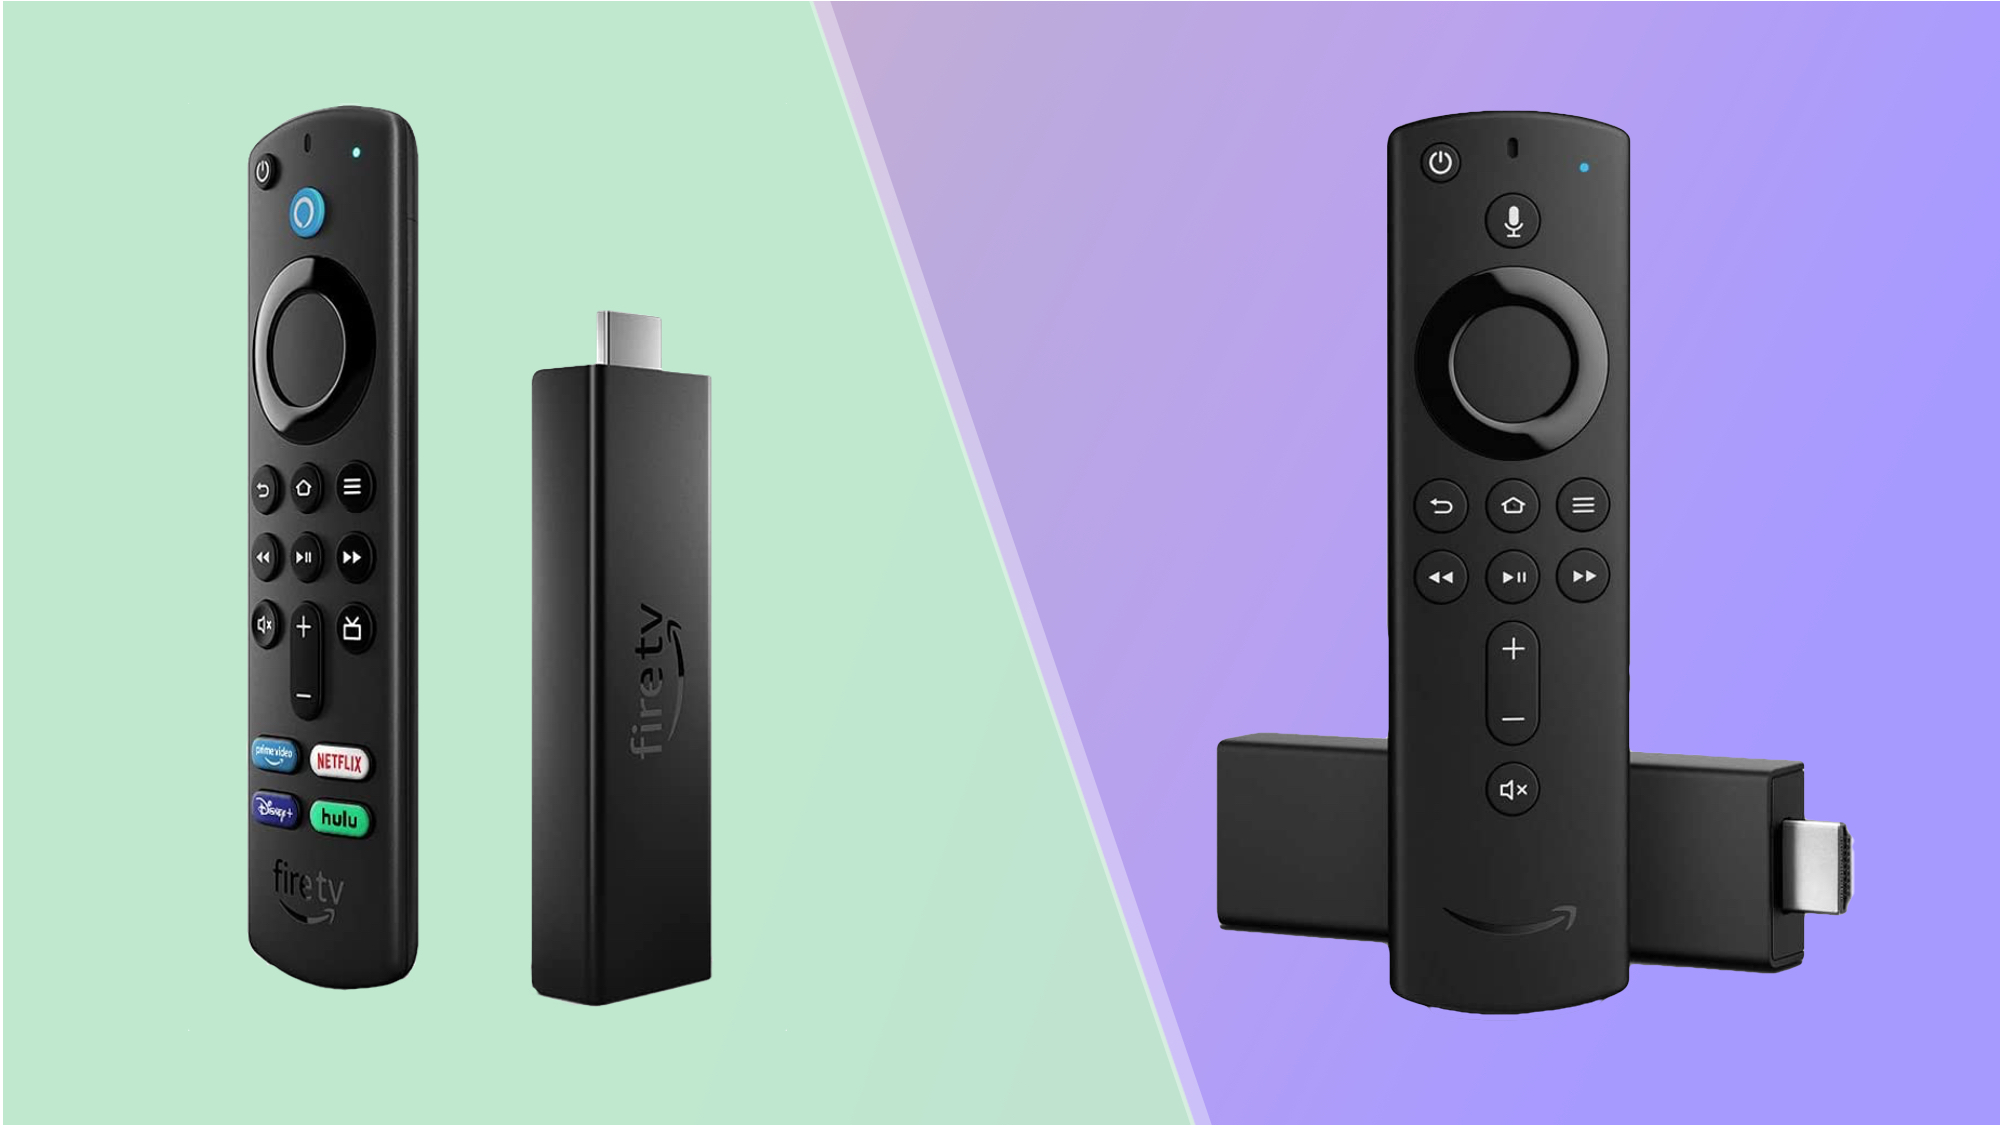 Fire TV Stick 4K Max with WiFi 6 launched in India: Check